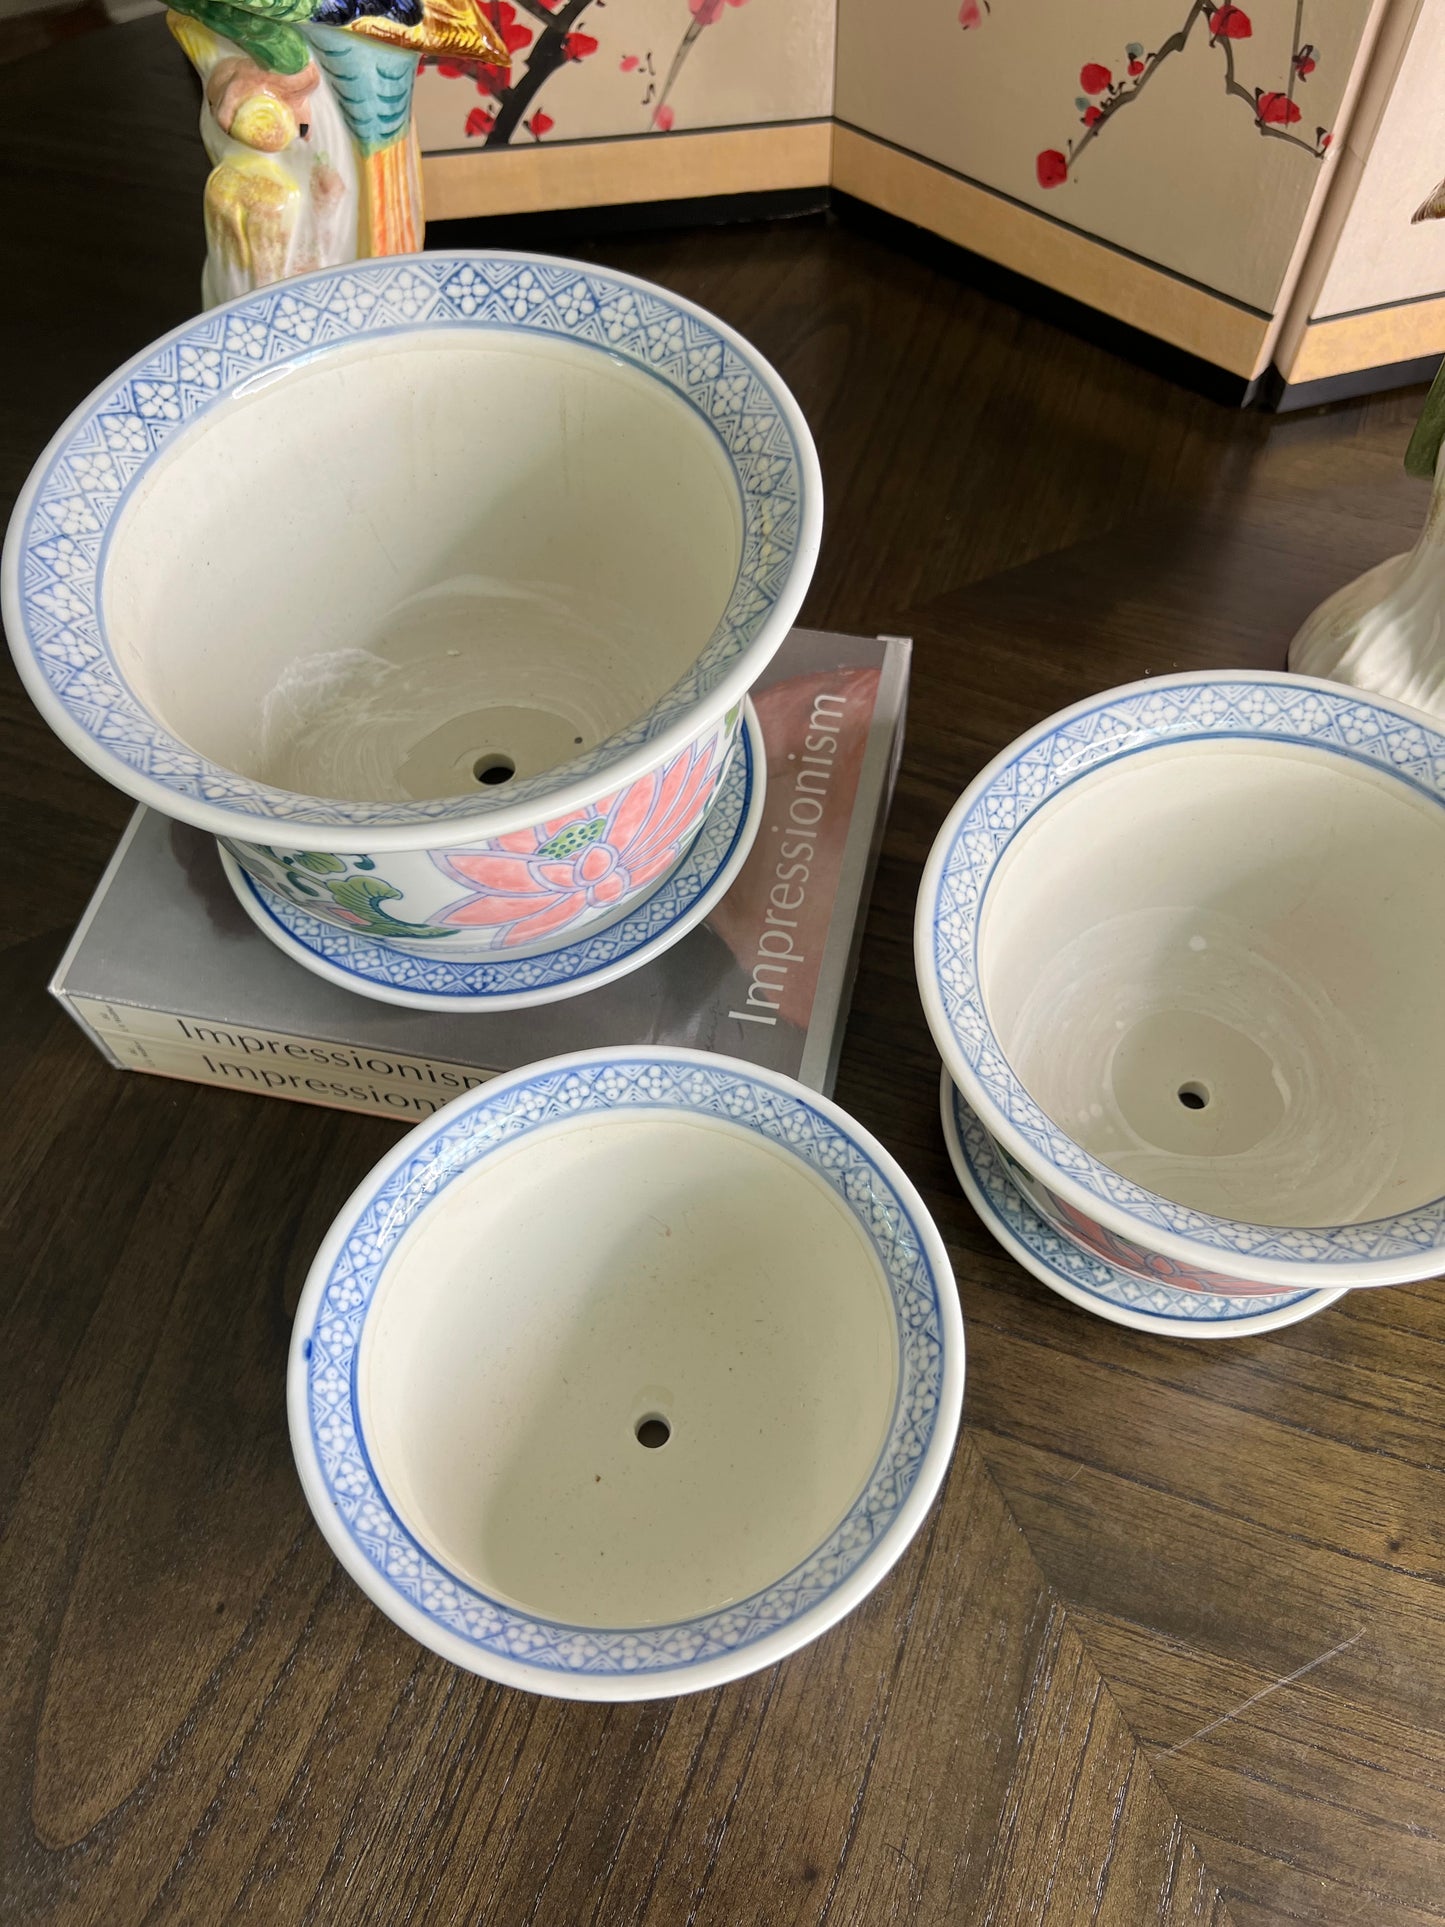 Set of 3 Vintage Chinoiserie Lotus and Lilypad Planters With Saucers